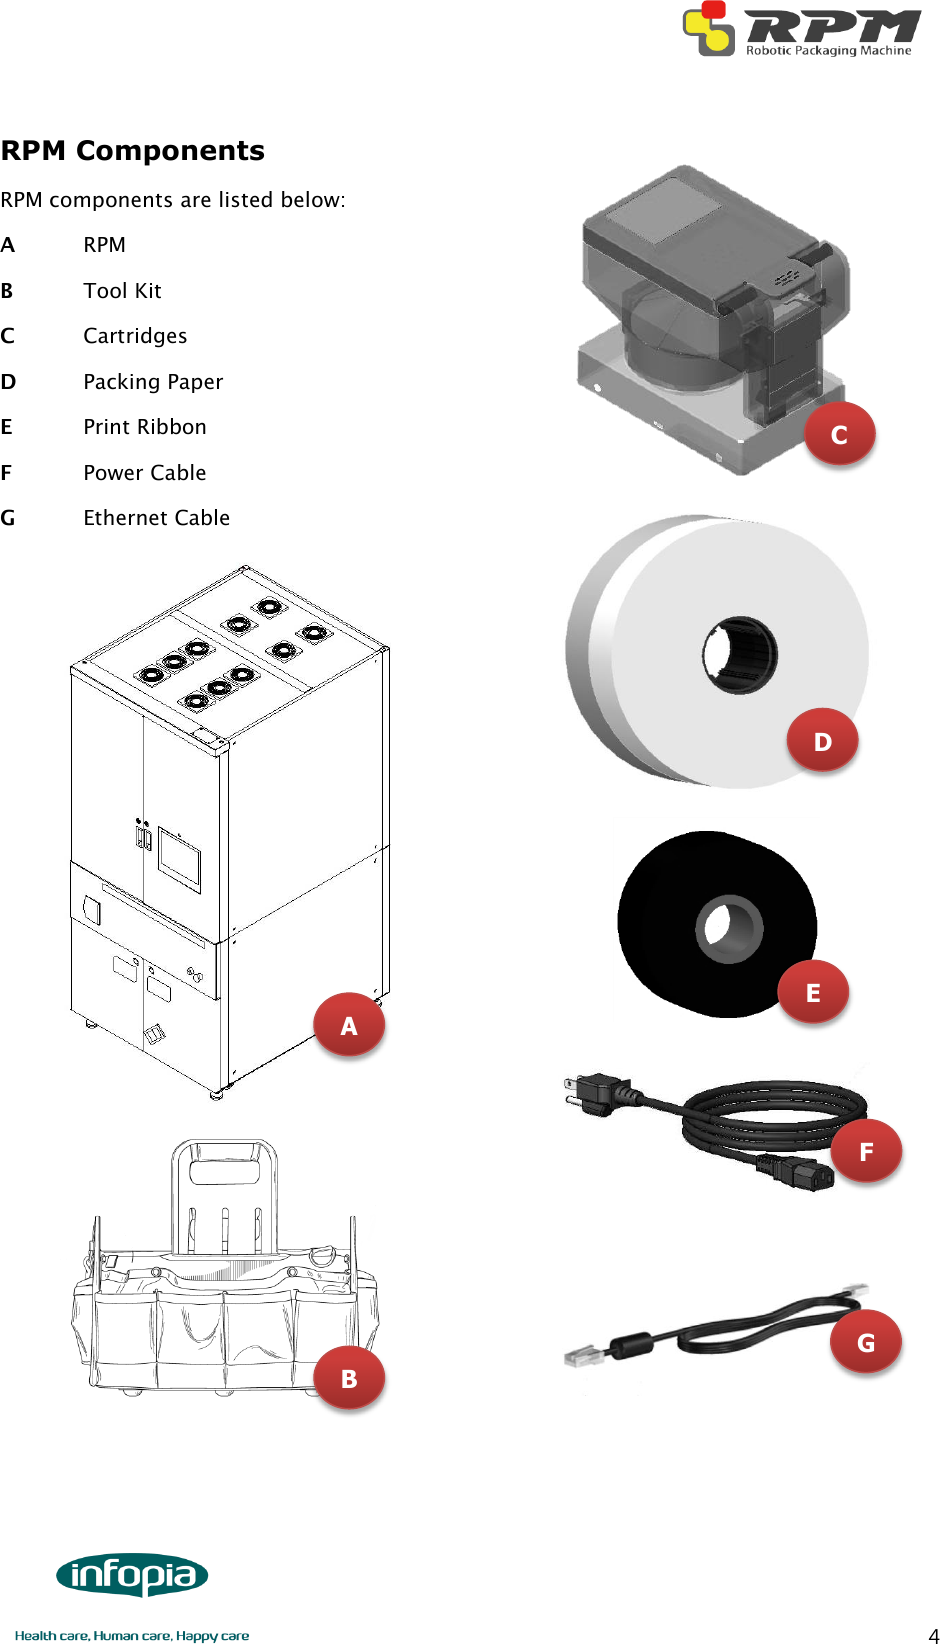        4 RPM Components RPM components are listed below: A    RPM B    Tool Kit C    Cartridges D    Packing Paper E    Print Ribbon F  Power Cable G  Ethernet Cable             A B F G E D C 